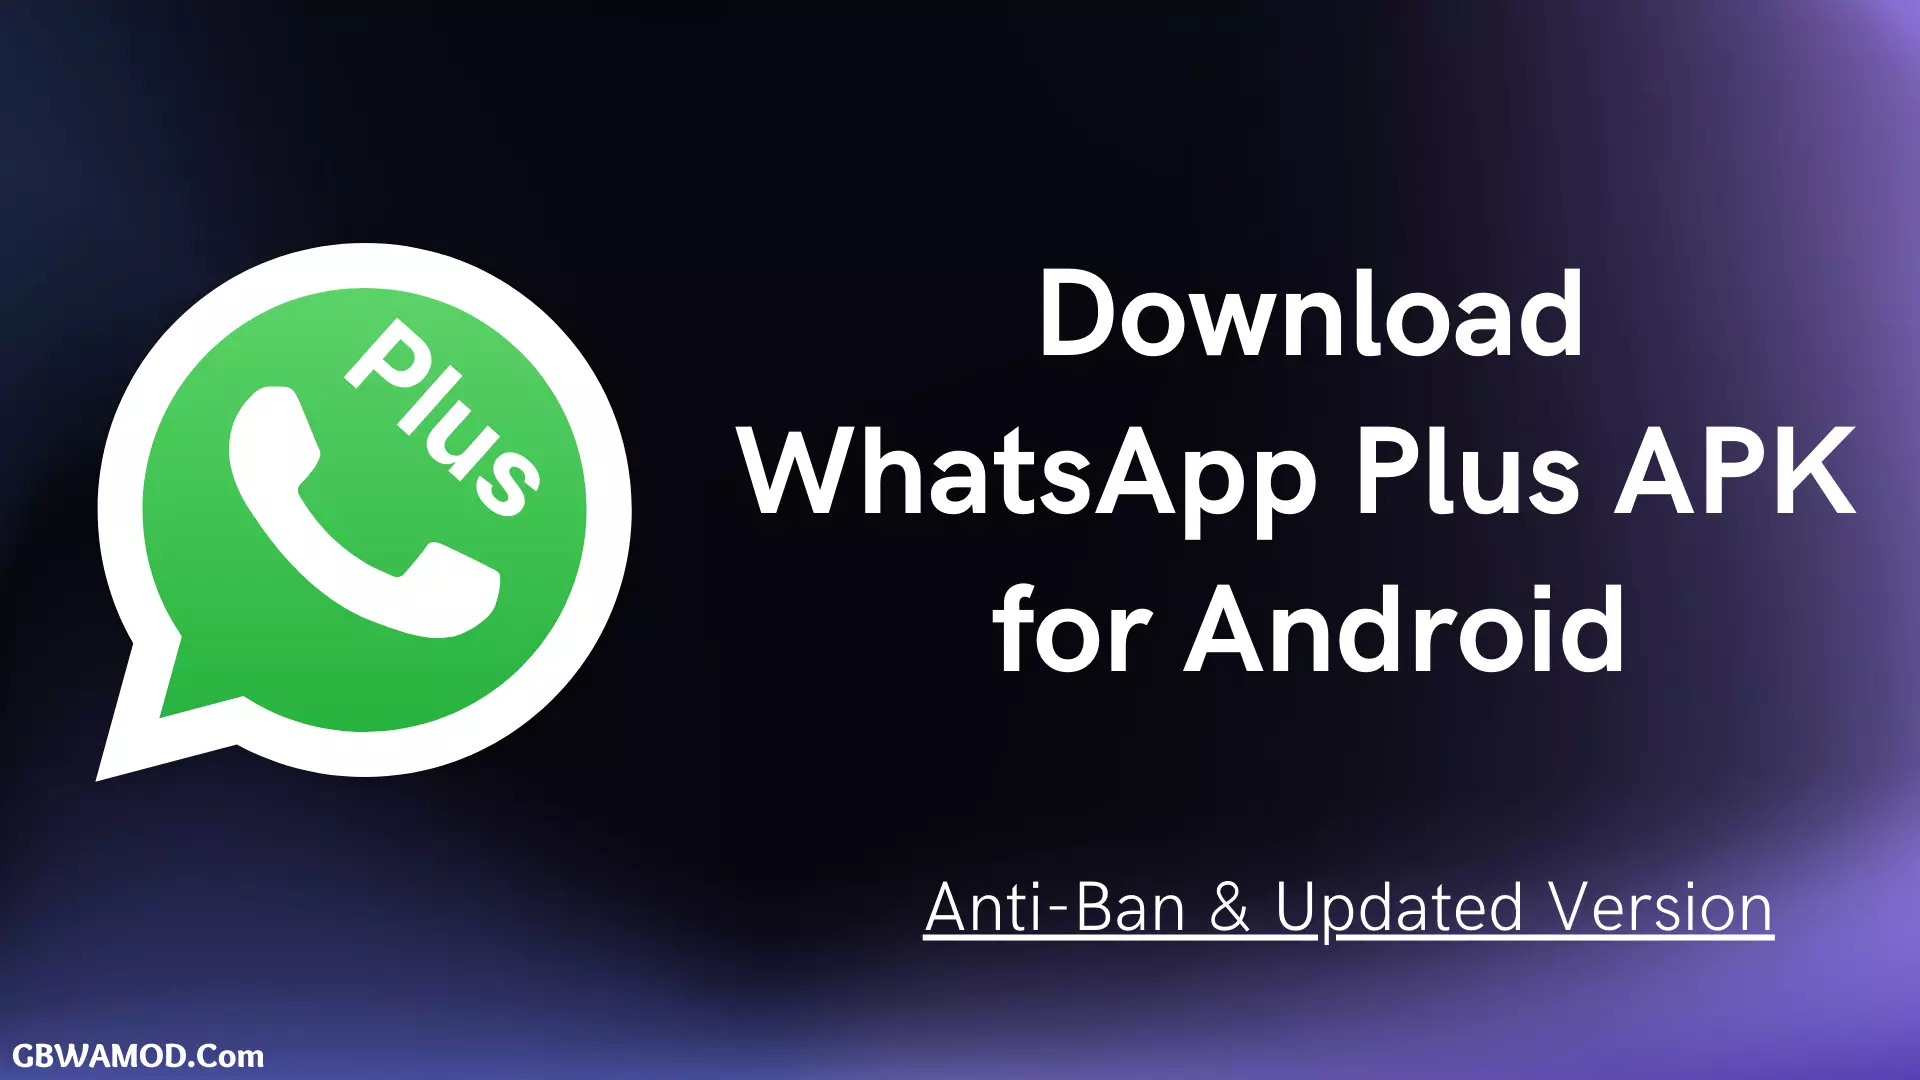 Download WhatsApp Plus from here